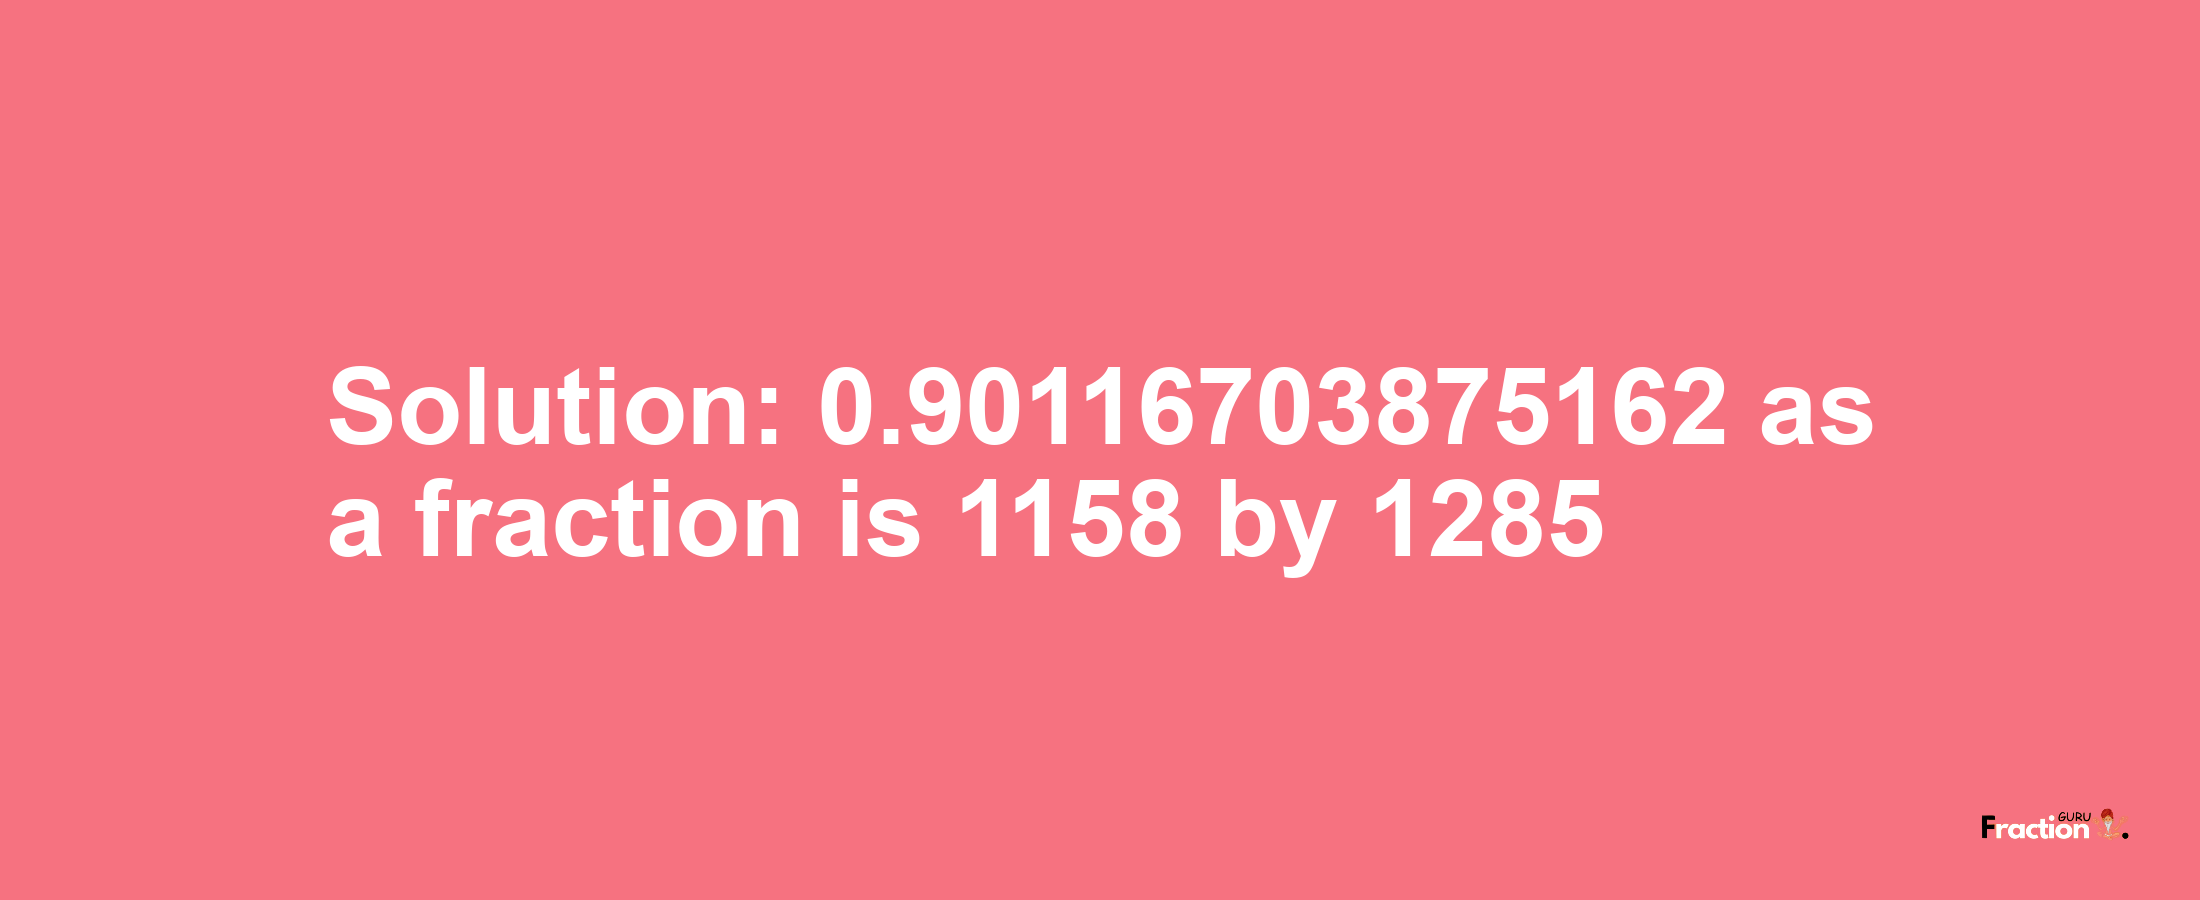 Solution:0.90116703875162 as a fraction is 1158/1285